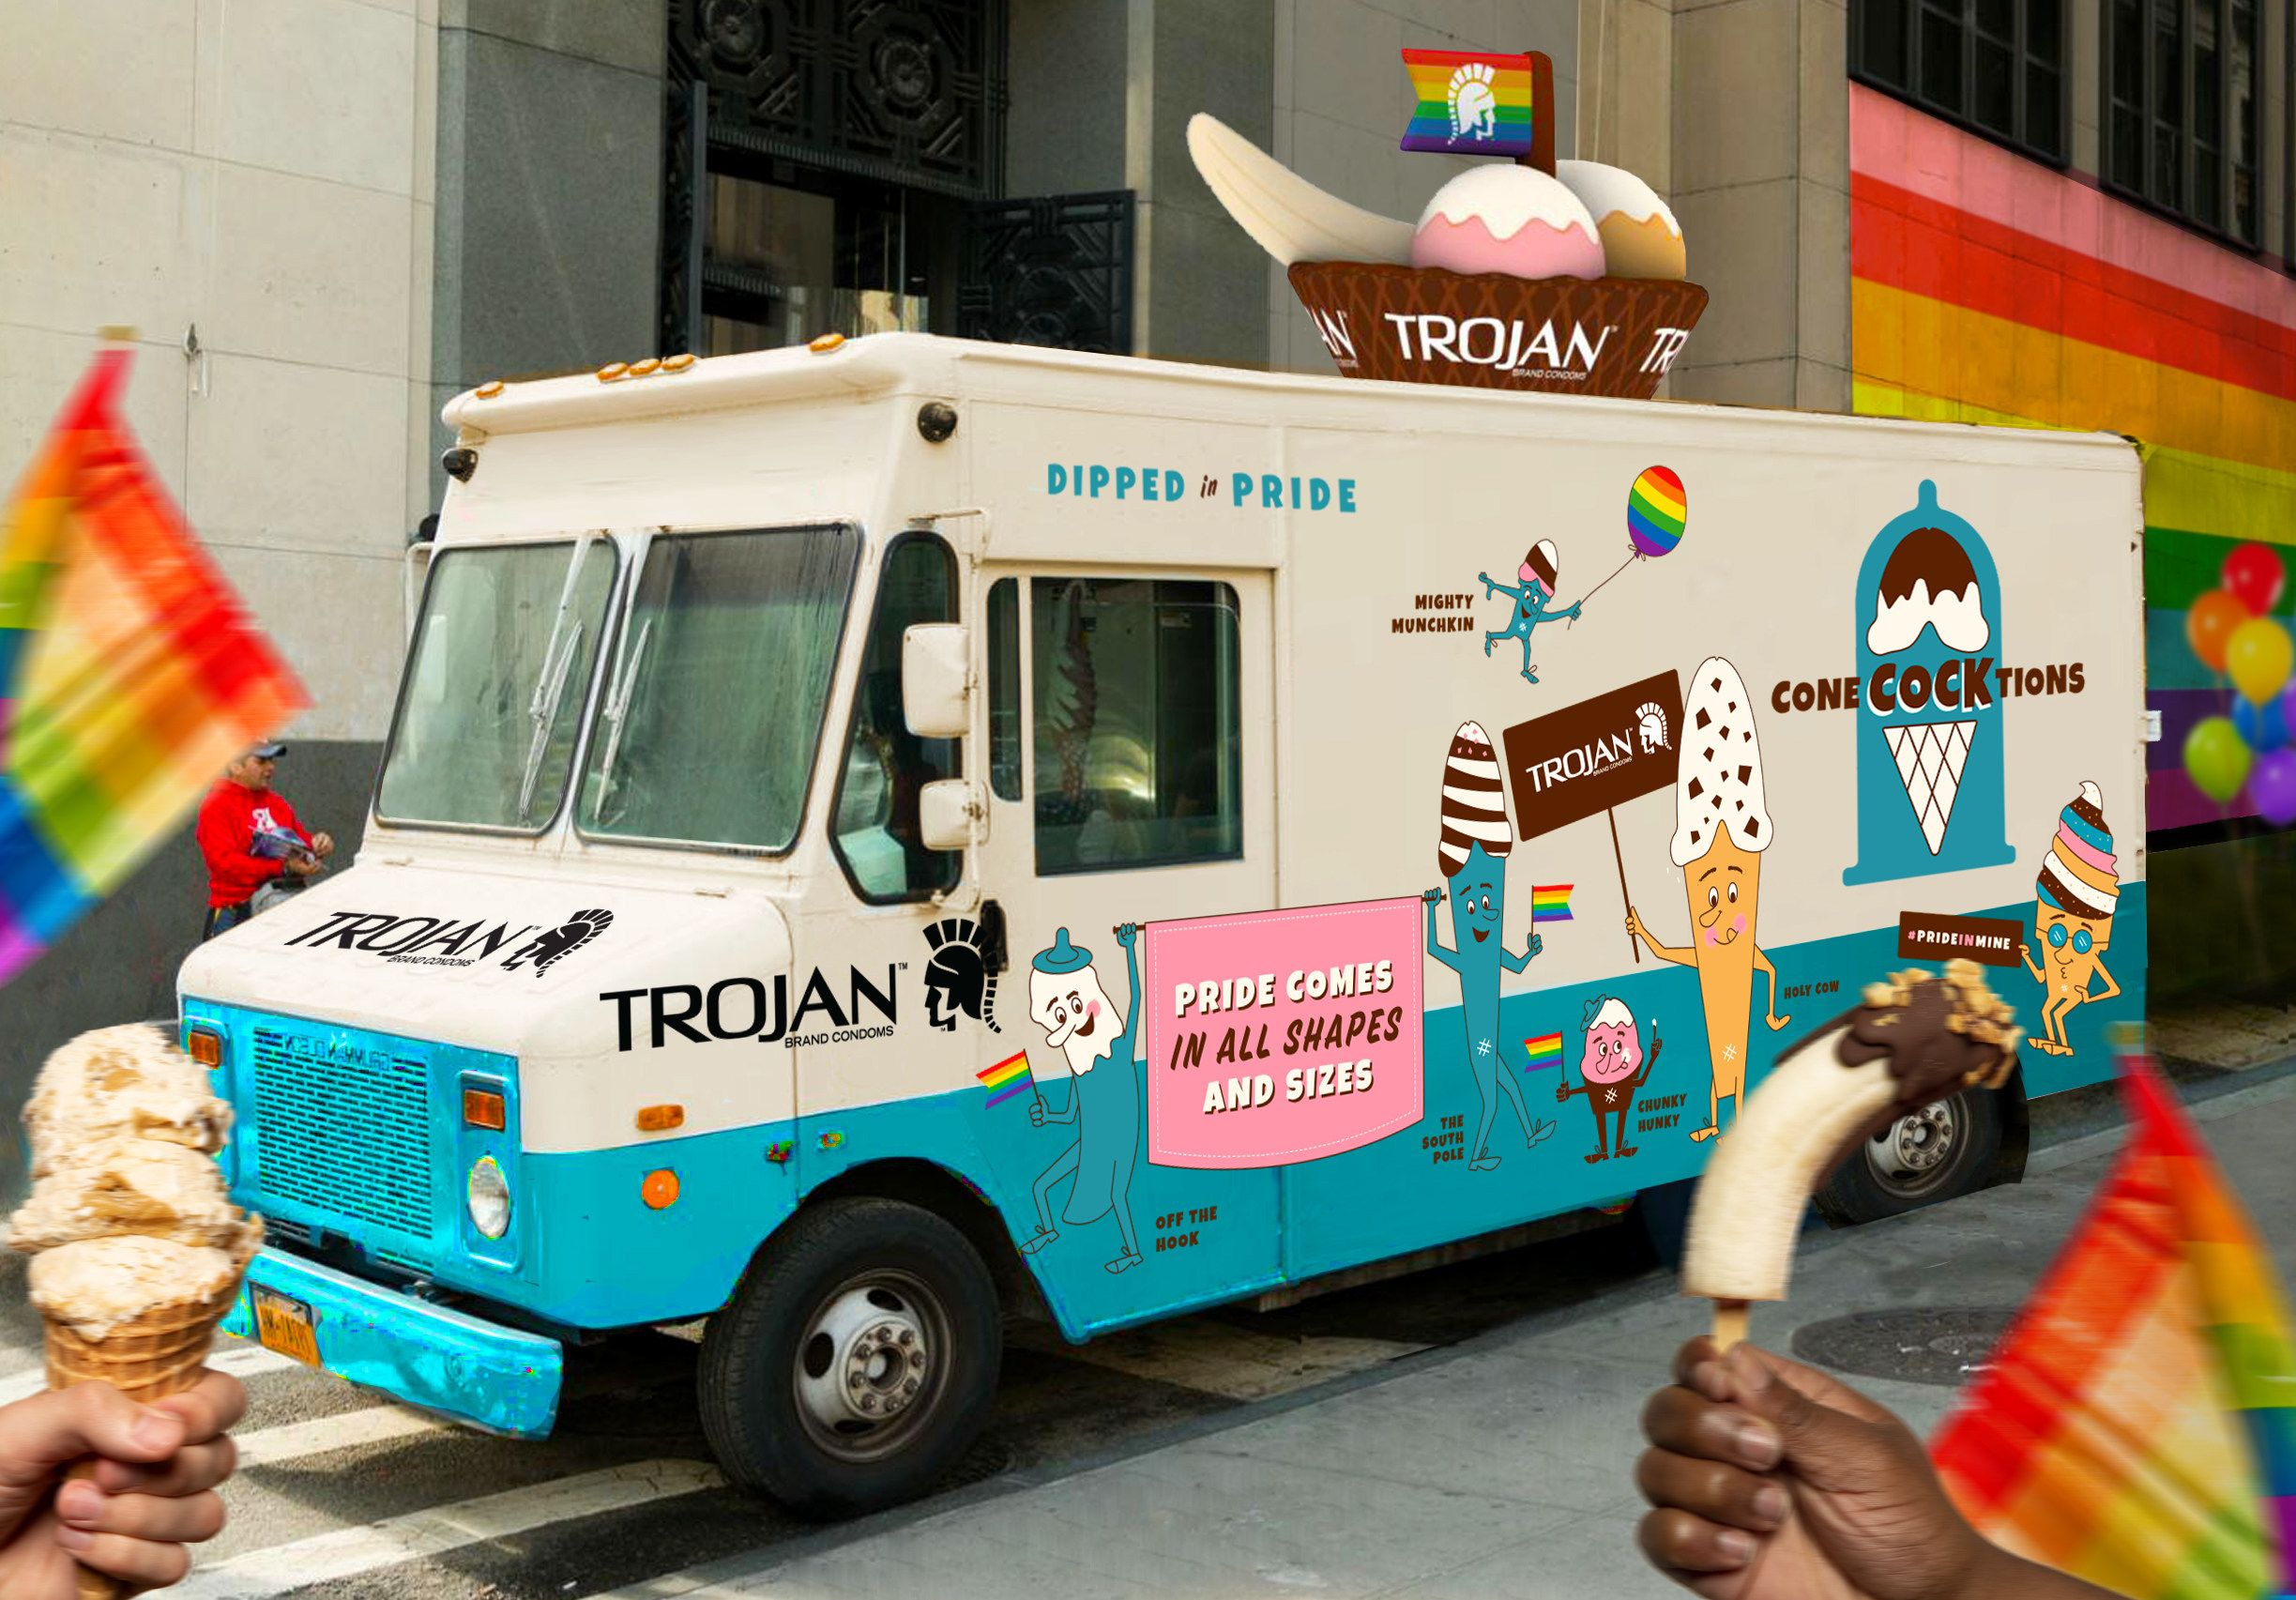 Trojan Condoms Is Launching A Conecocktions Ice Cream Truck For Pride